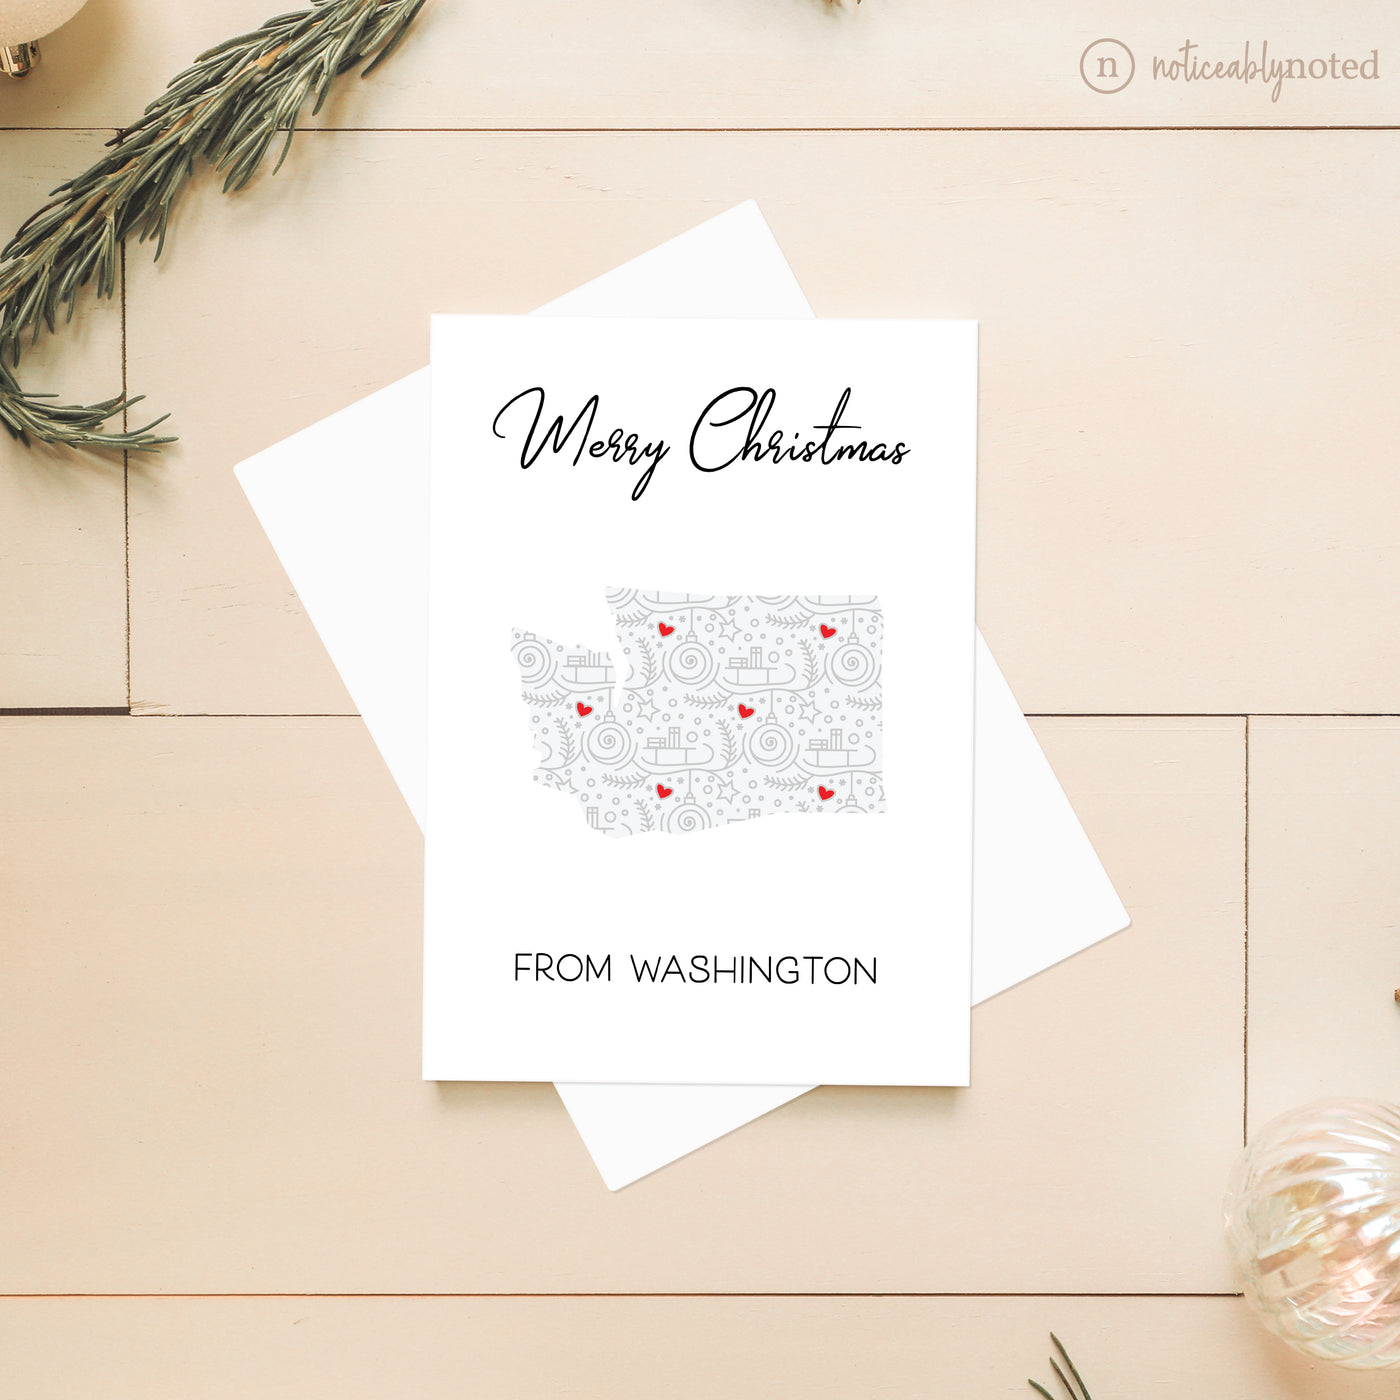 Washington Christmas Card - Merry Christmas | Noticeably Noted